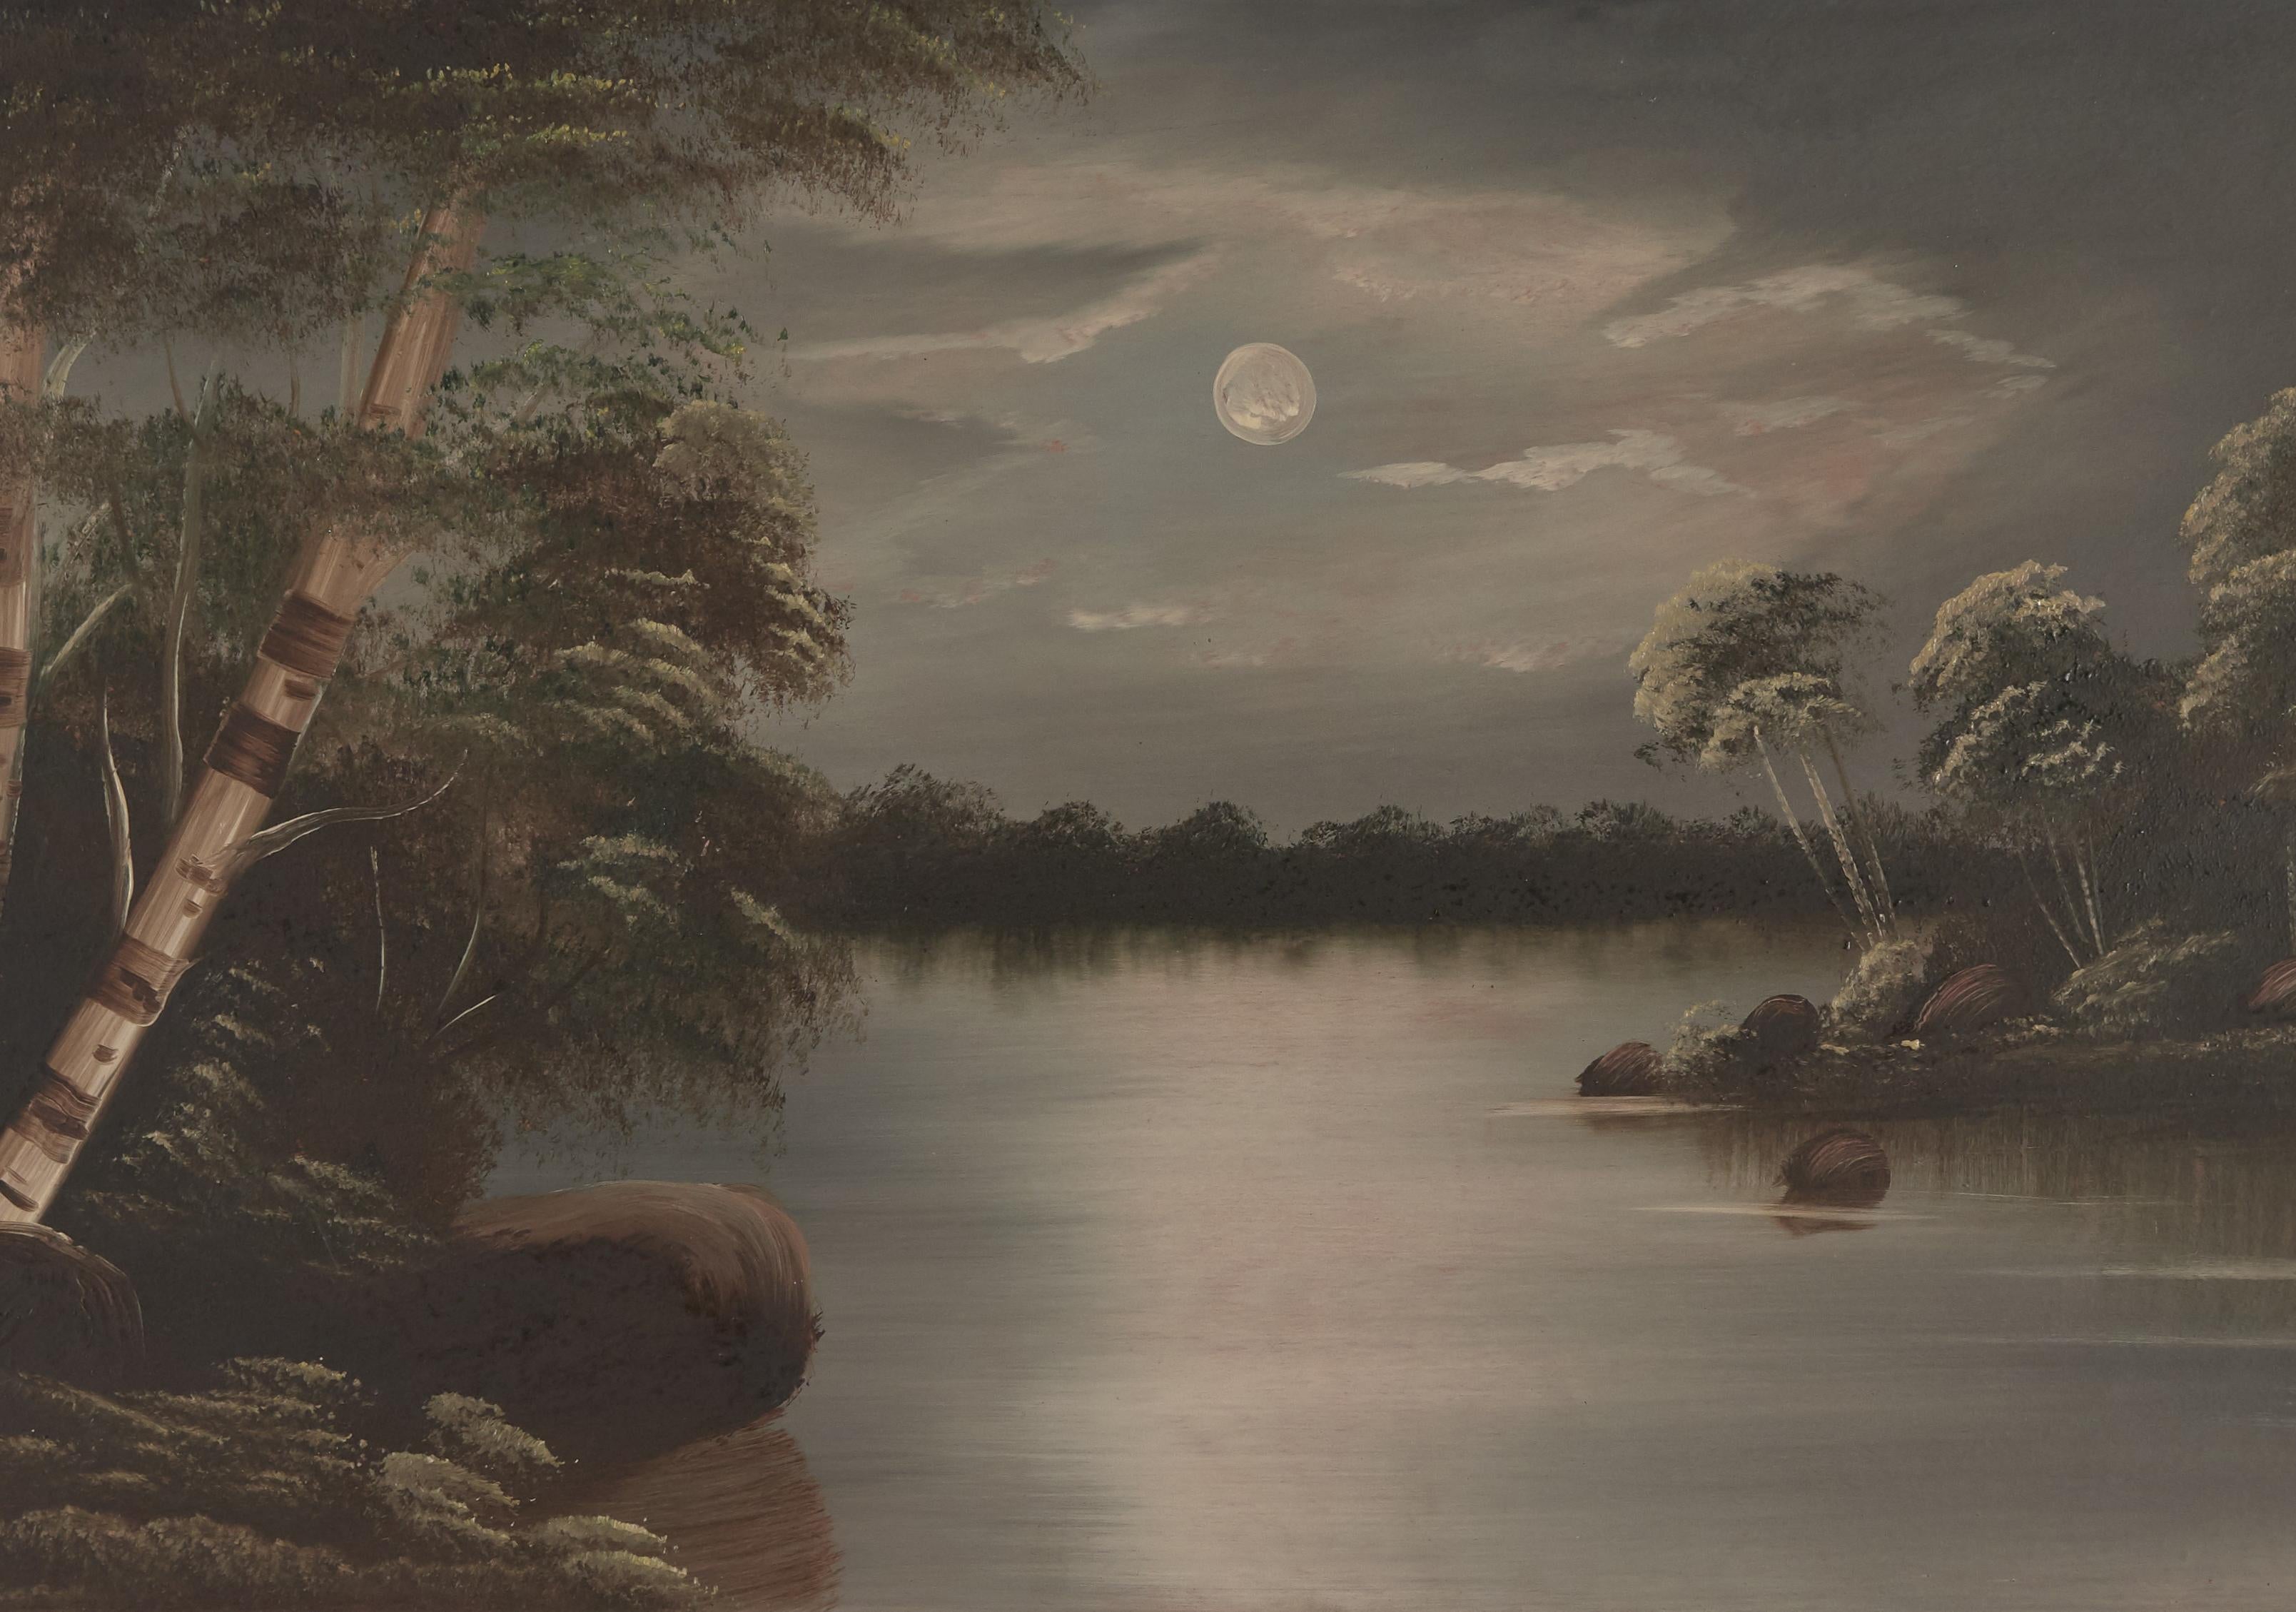 SC89.158.1a-Cropped of [Scene of River at Early Evening]